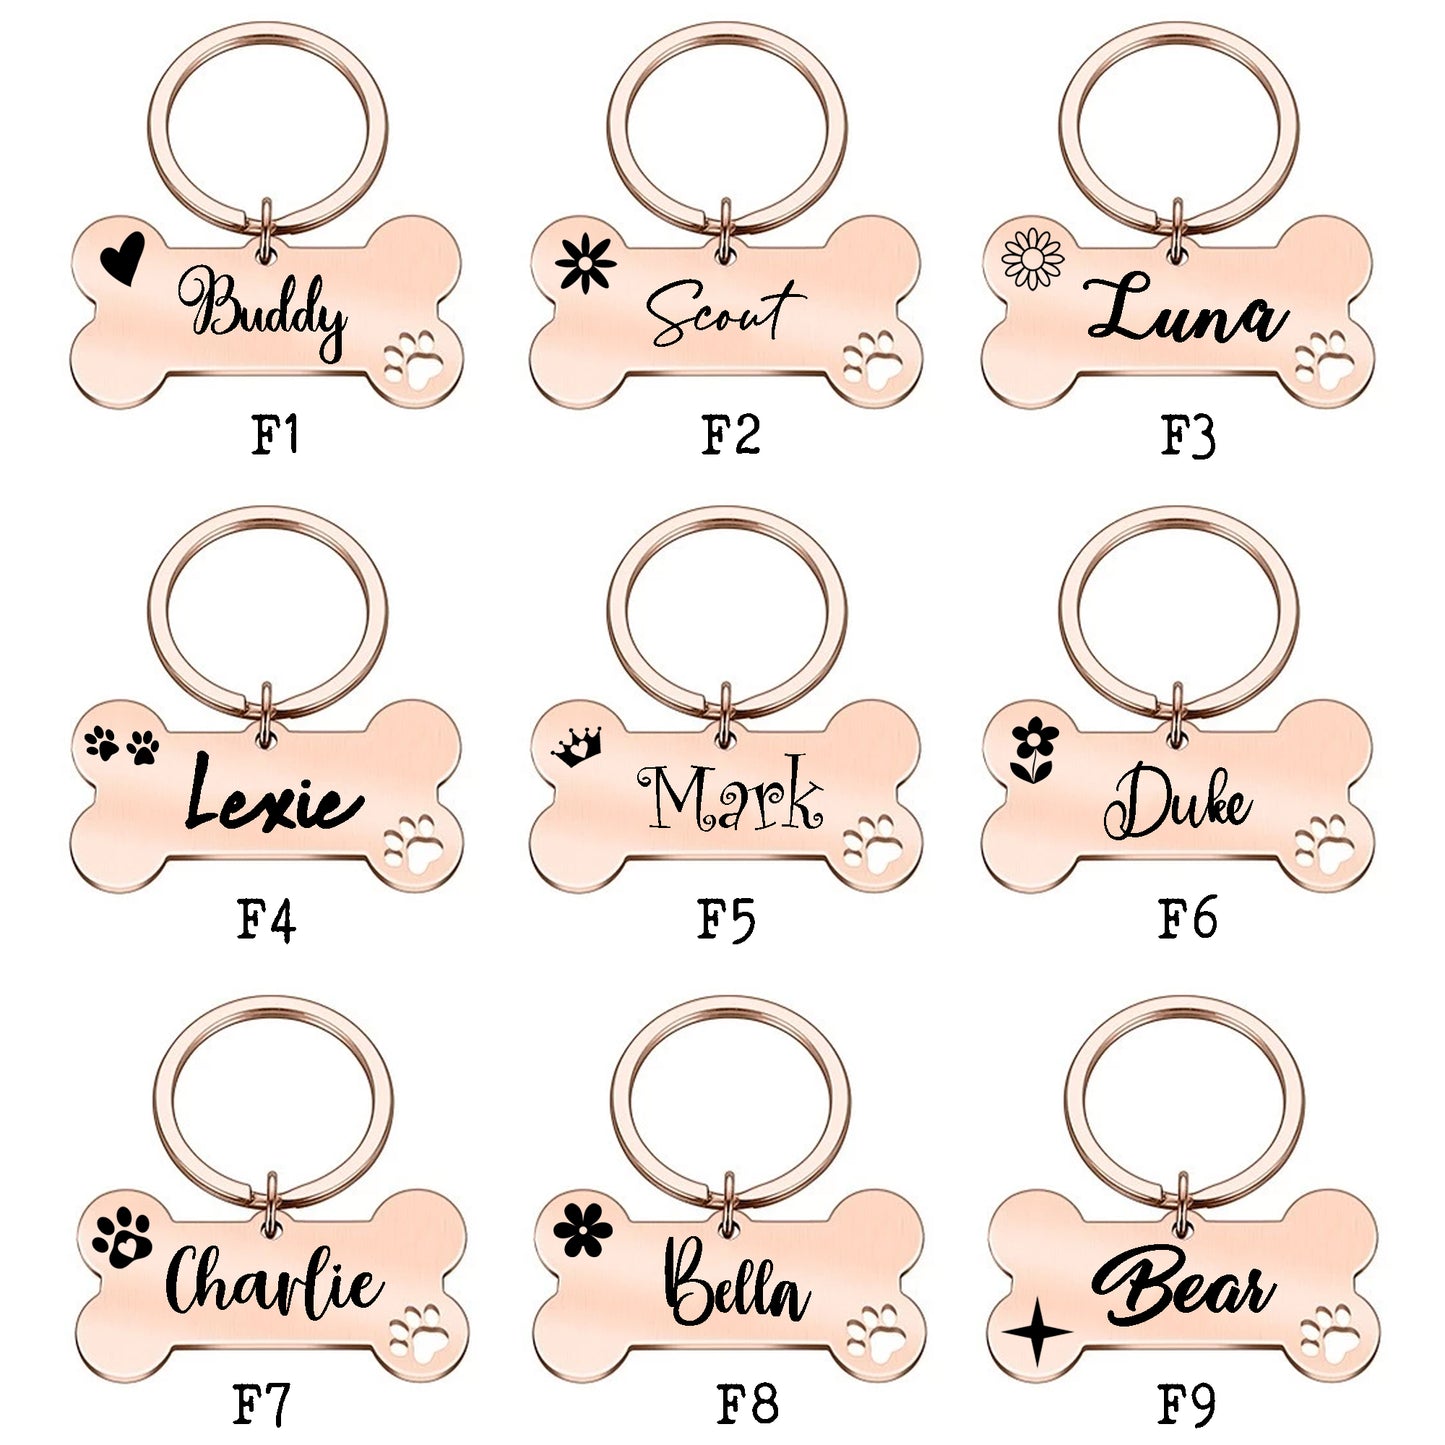 Personalized Bone Dog Tag Engraved Pet ID